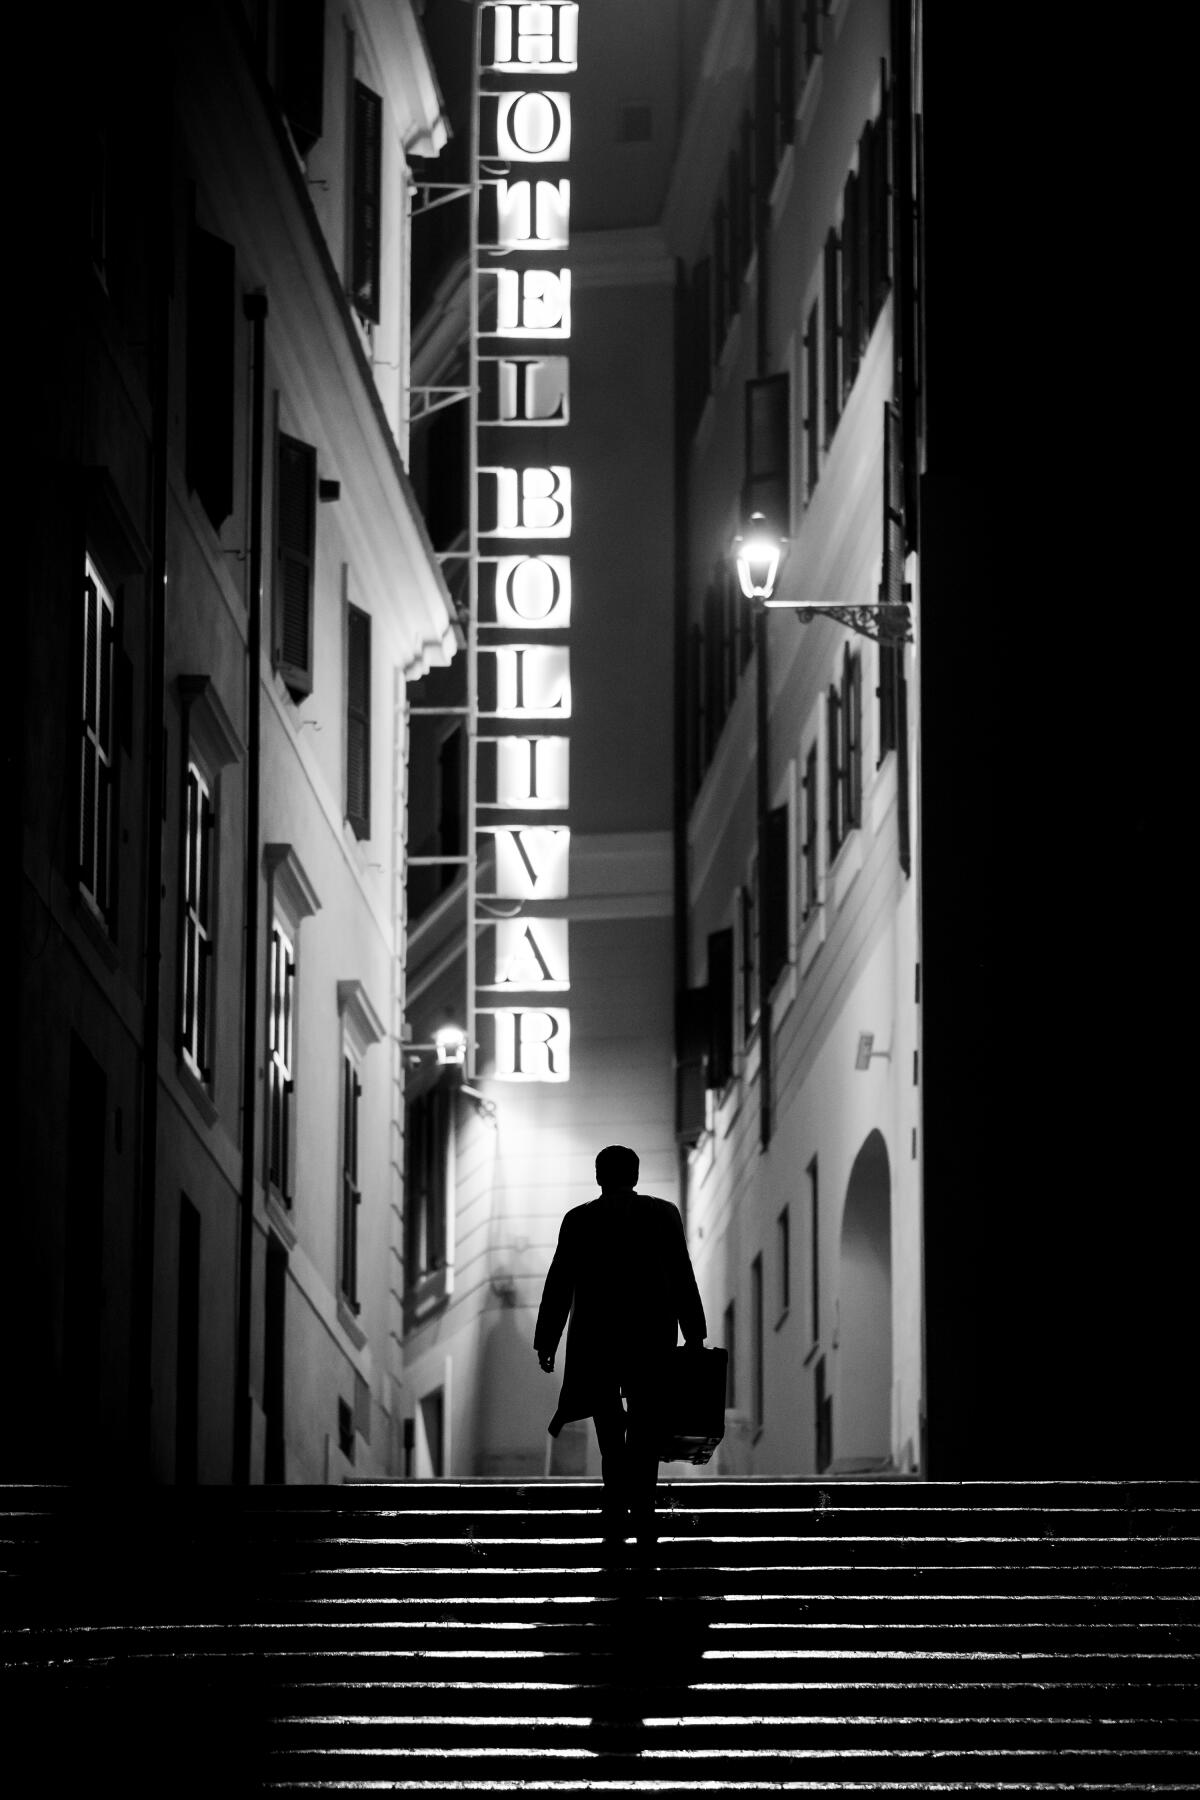  A man walks up a staircase lit by a hotel sign at night in "Ripley."